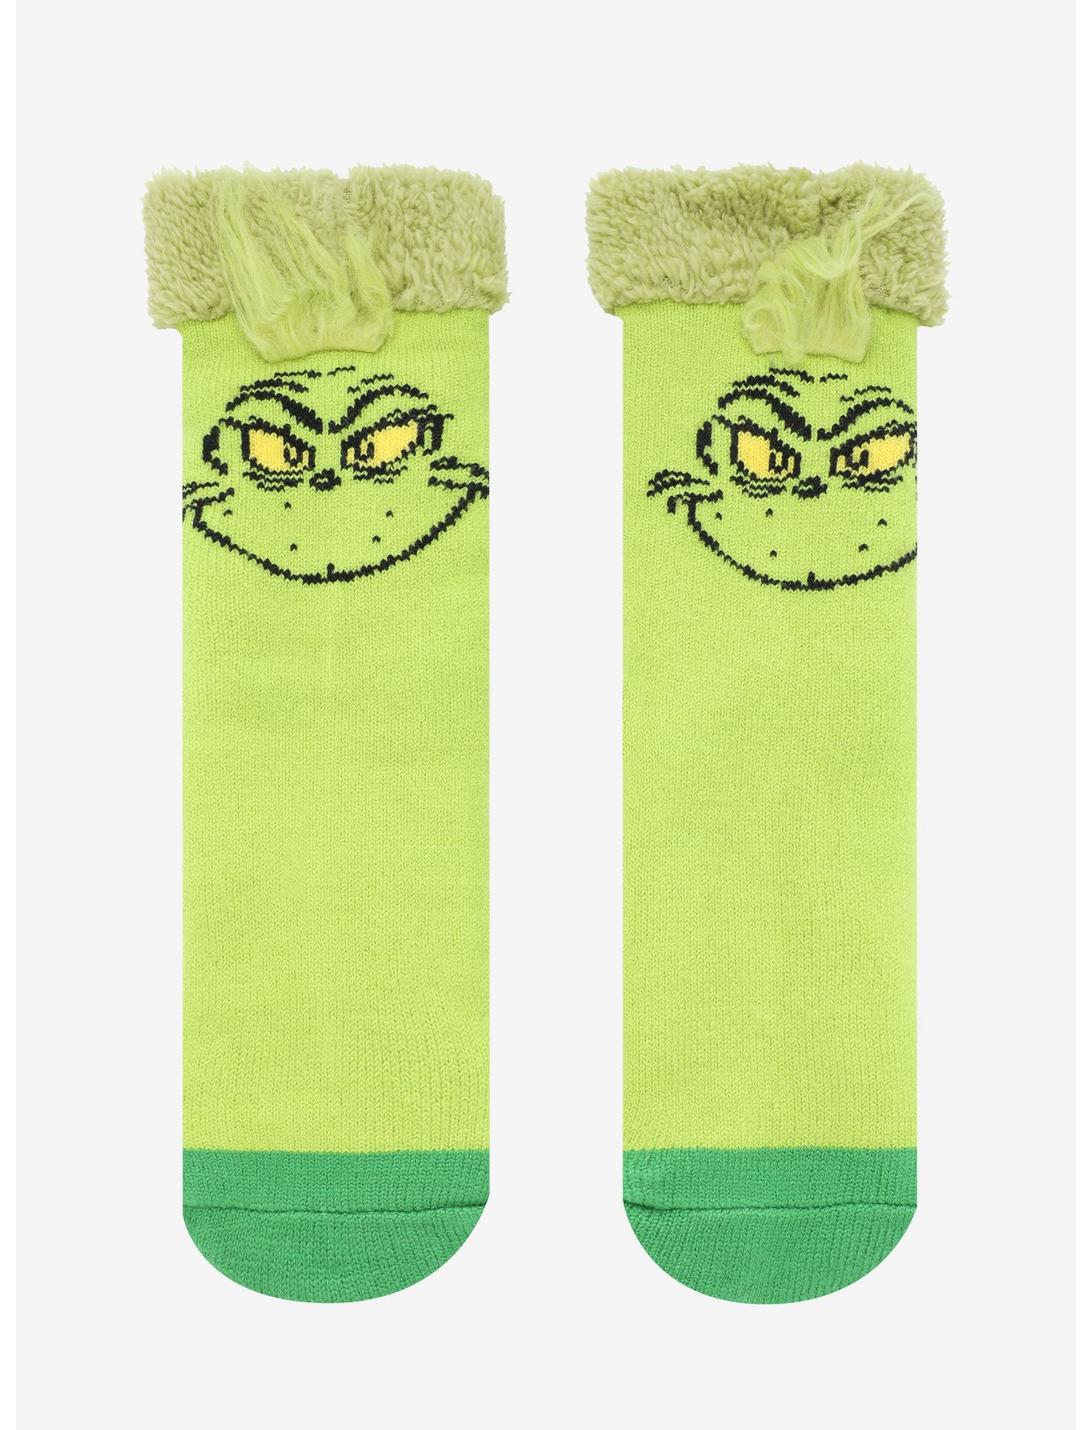 How The Grinch Stole Christmas Grinch Cozy Socks, , hi-res